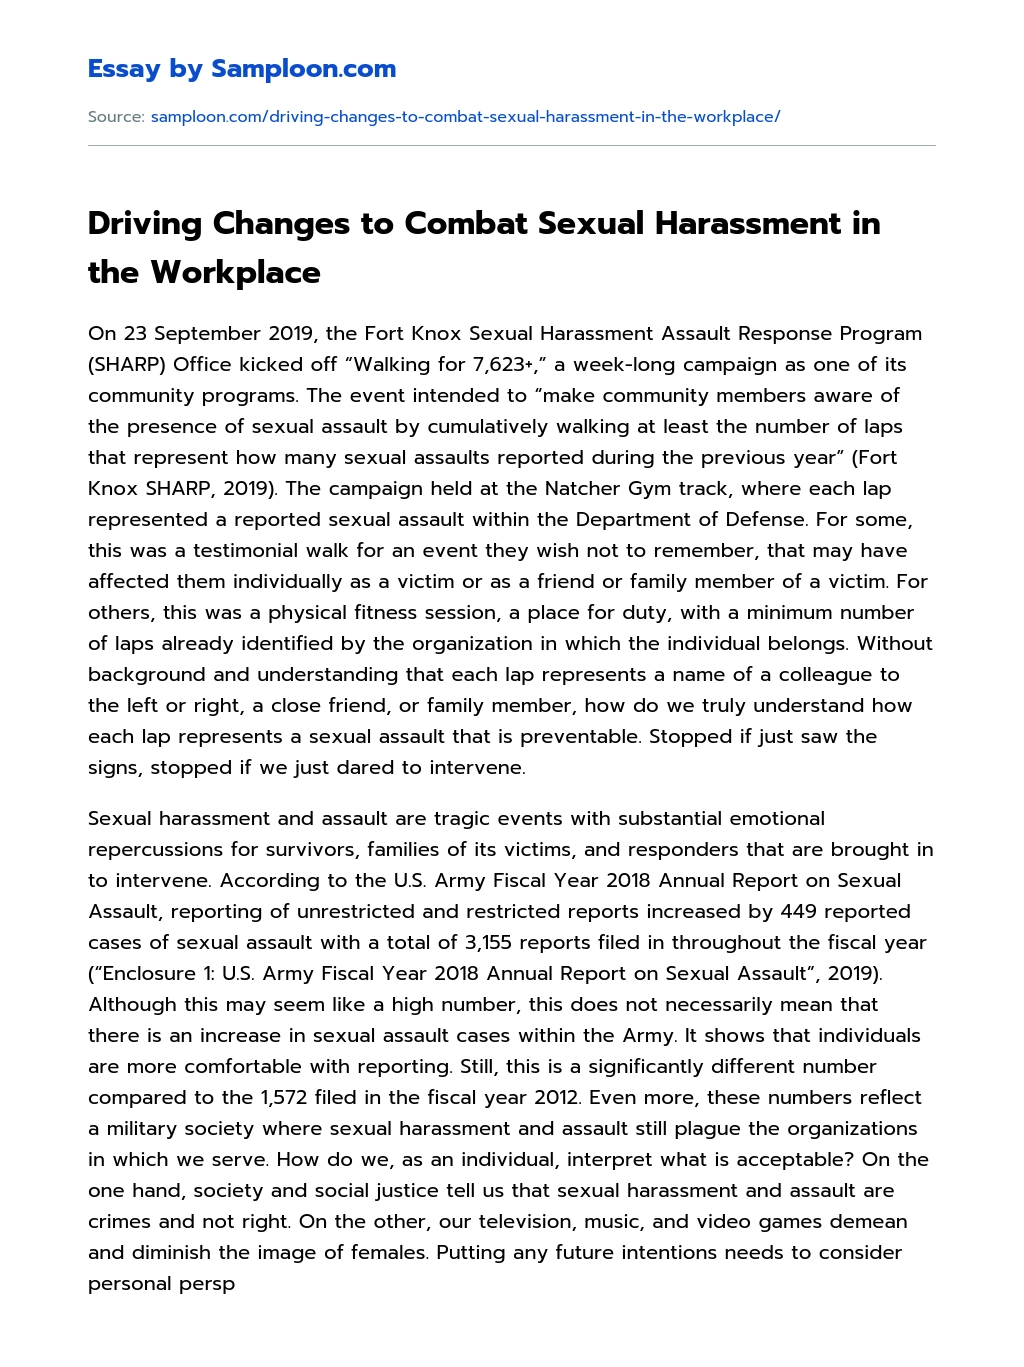 Driving Changes to Combat Sexual Harassment in the Workplace essay